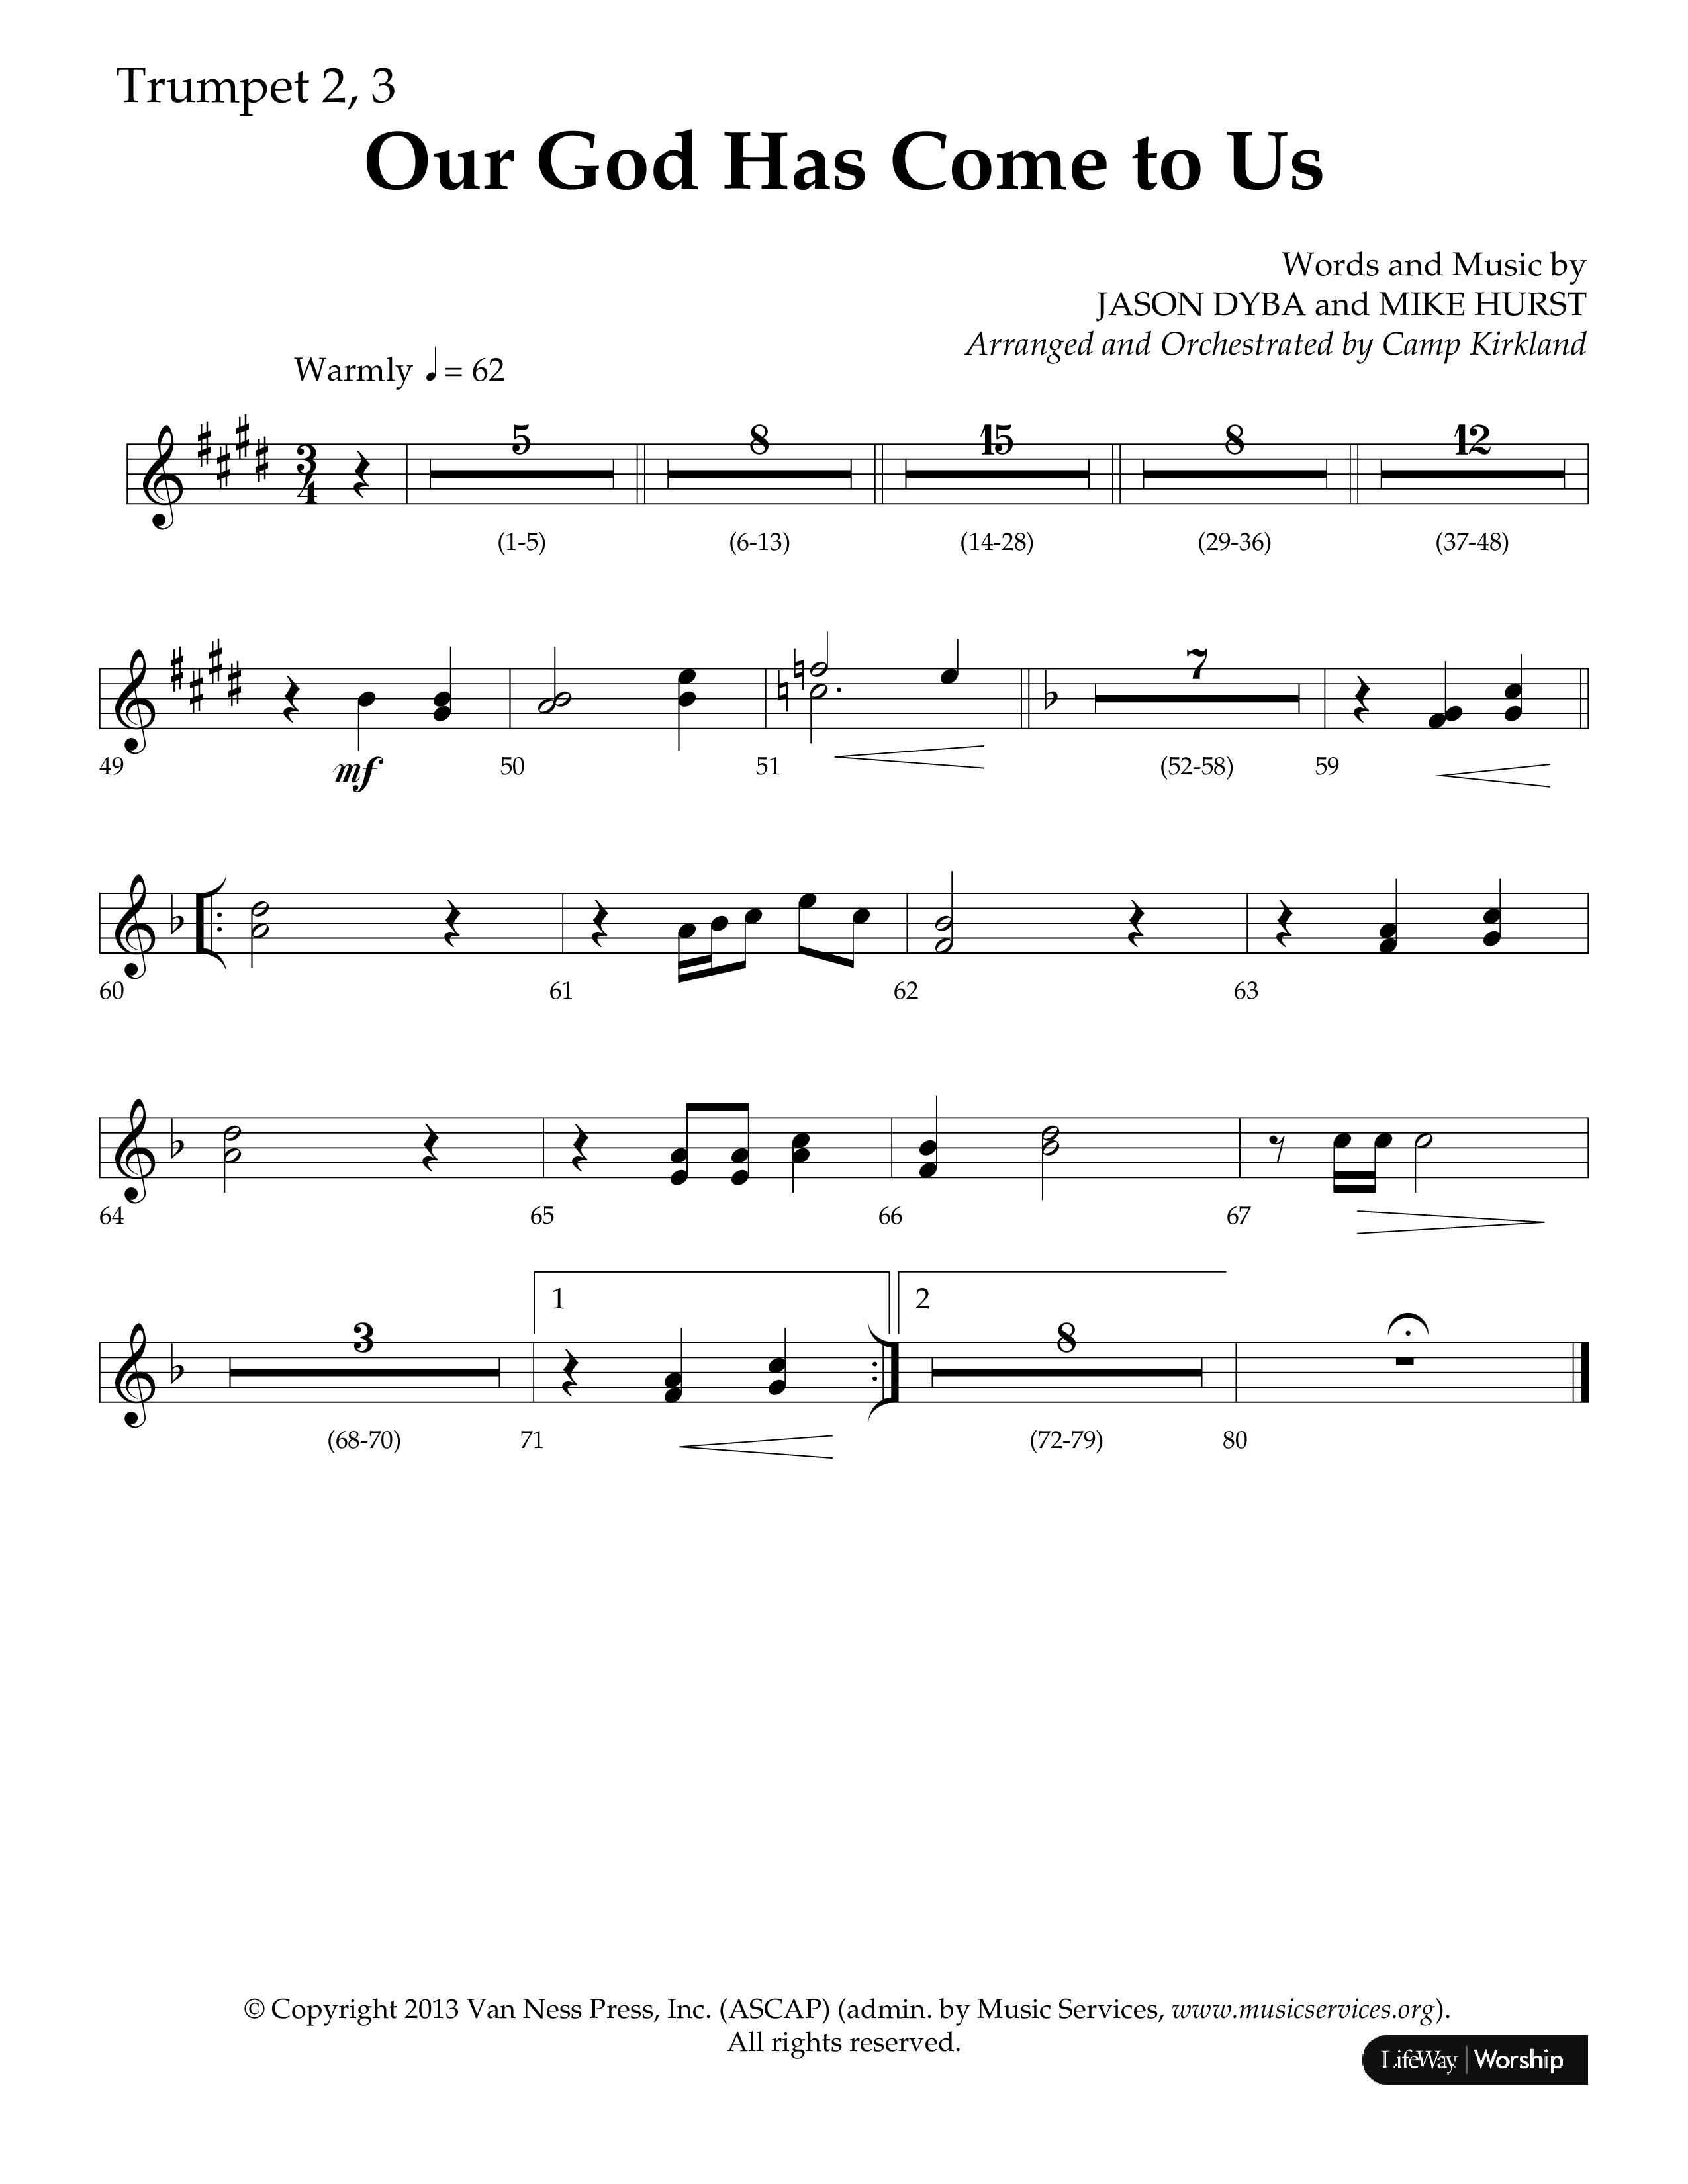 Our God Has Come To Us (Choral Anthem SATB) Trumpet 2/3 (Lifeway Choral / Arr. Camp Kirkland)